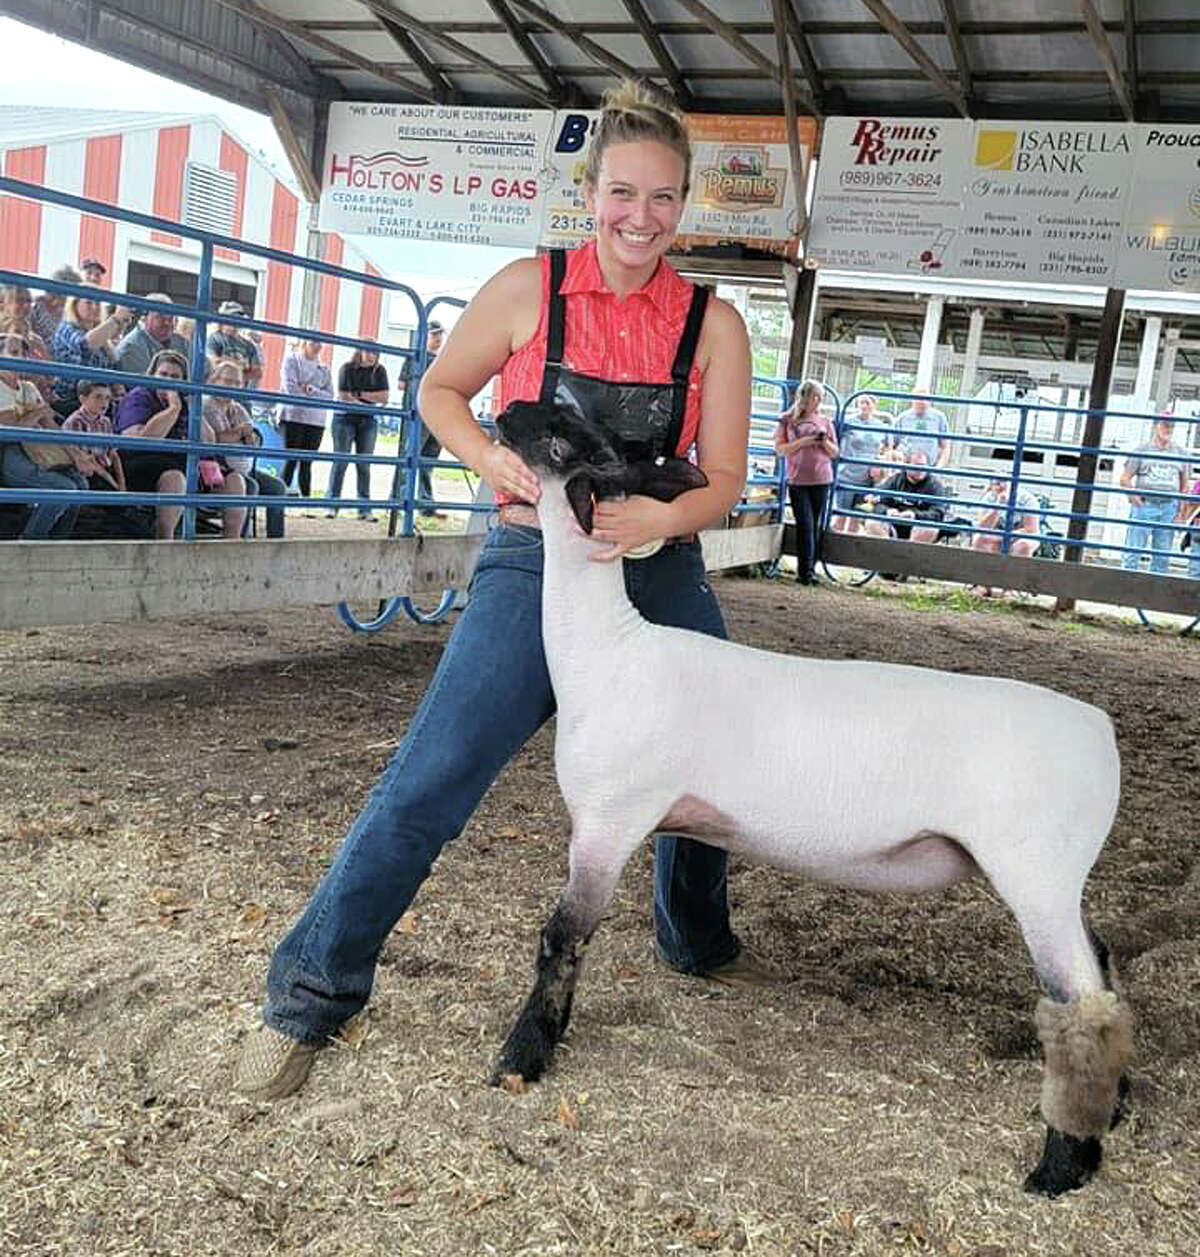 Lauren Marfio plans to sell her Reserve Champion sheep Thursday at Mecosta County's Junior Livestock Auction. She plans to donate her proceeds to the Pritchard family to help them with any medical expenses. Riley Pritchard, 19, was seriously hurt in a car crash in late June. 